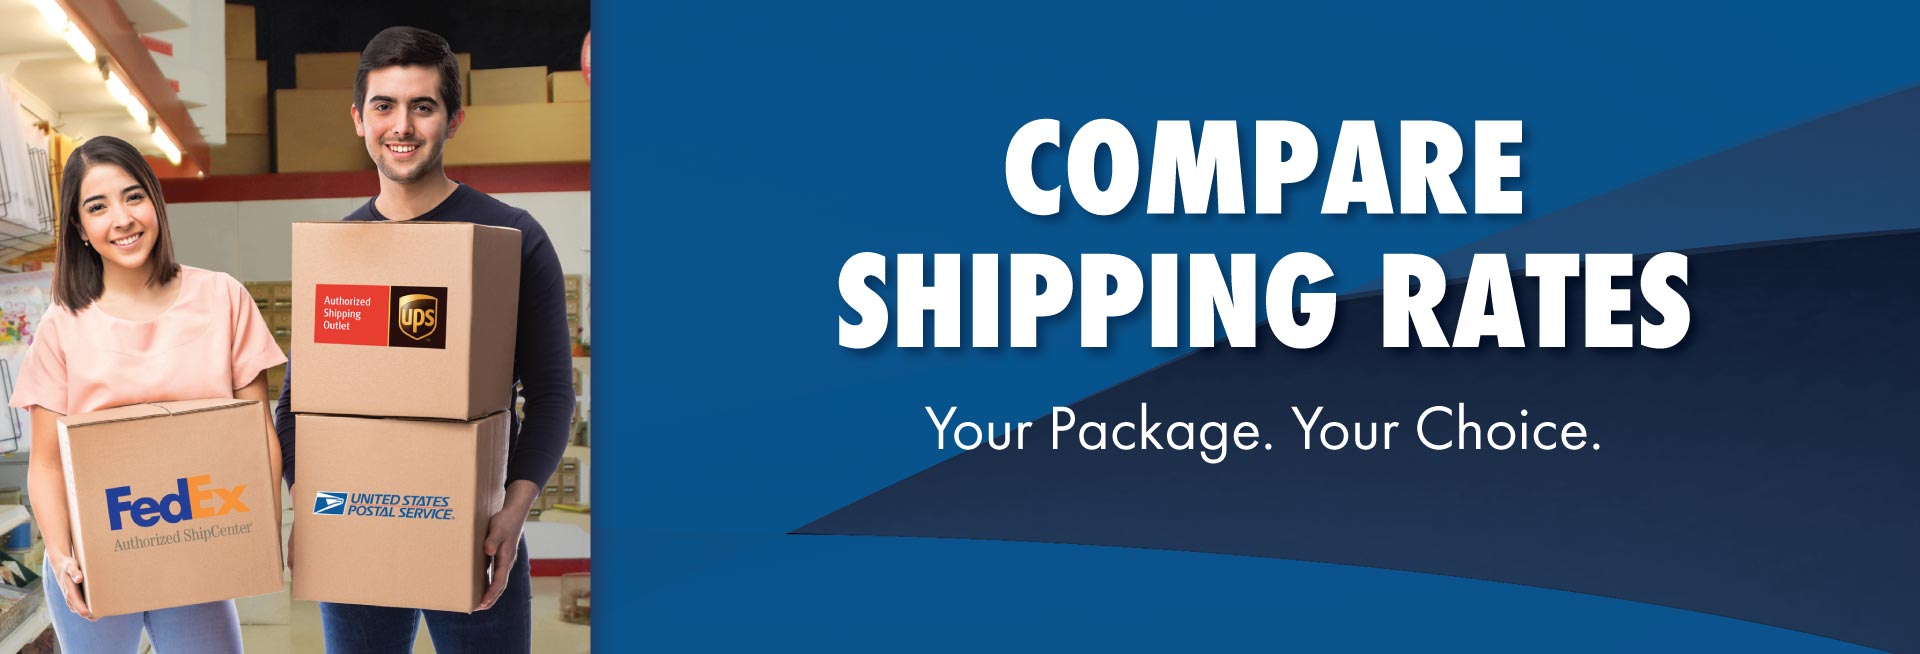 Compare Shipping Rates. Your package. Your choice.